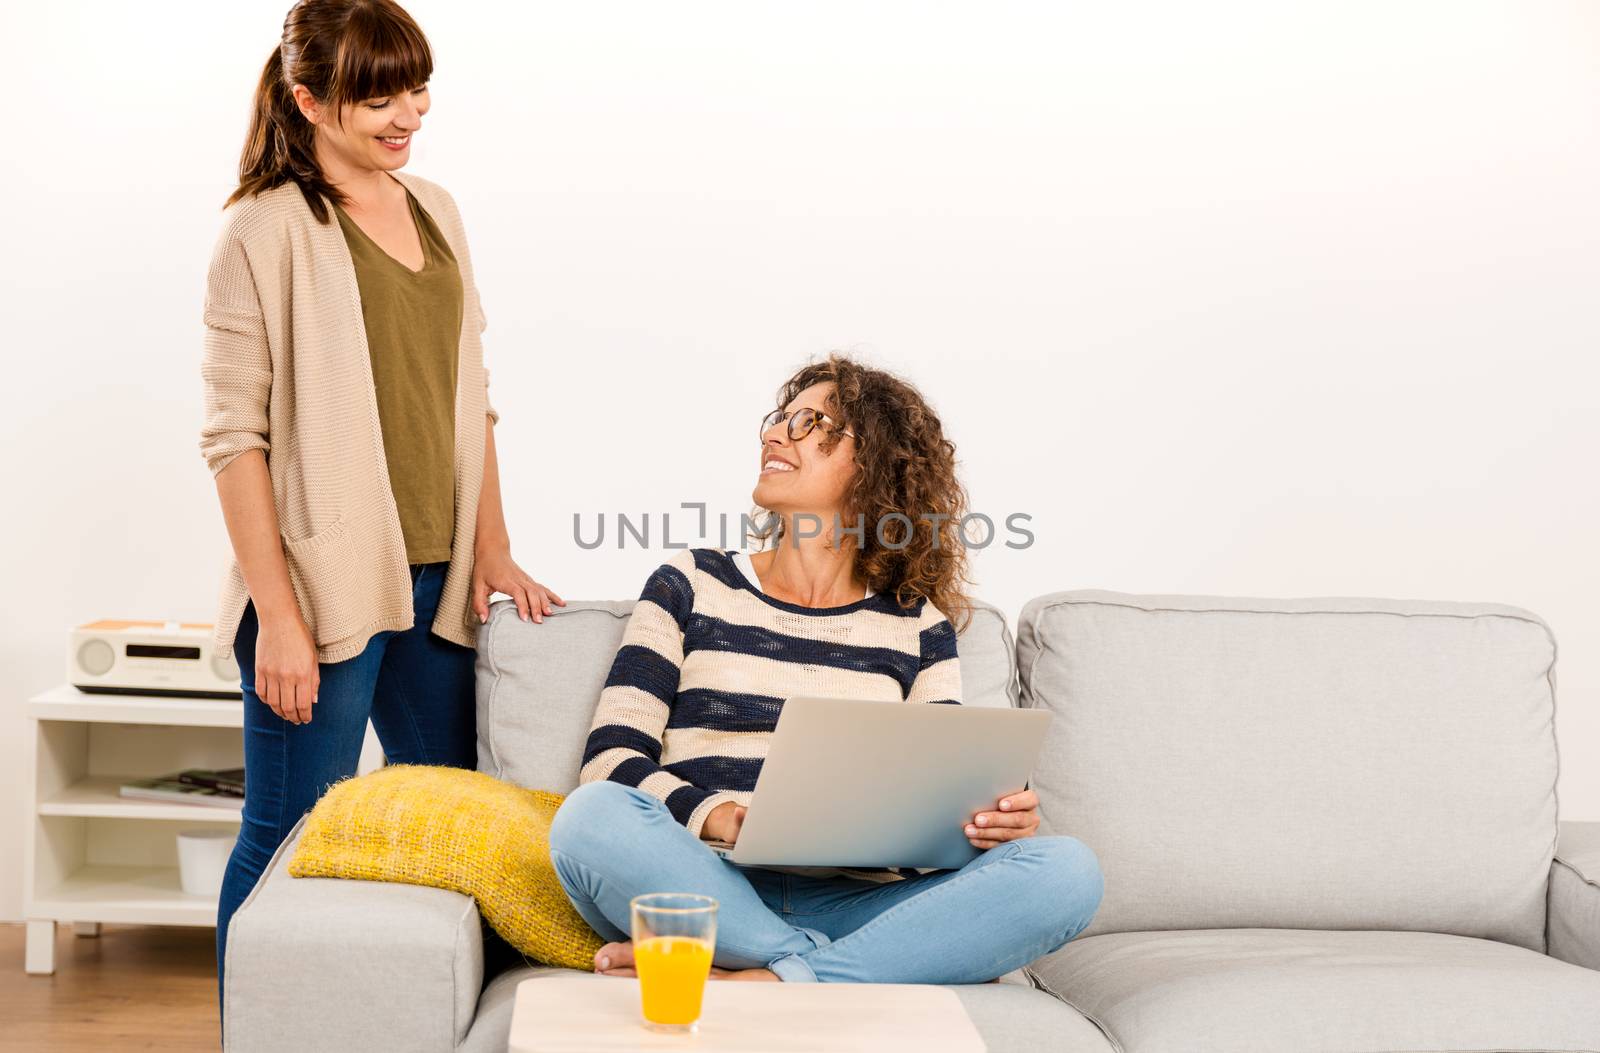 Two beautiful women at home working with a laptop